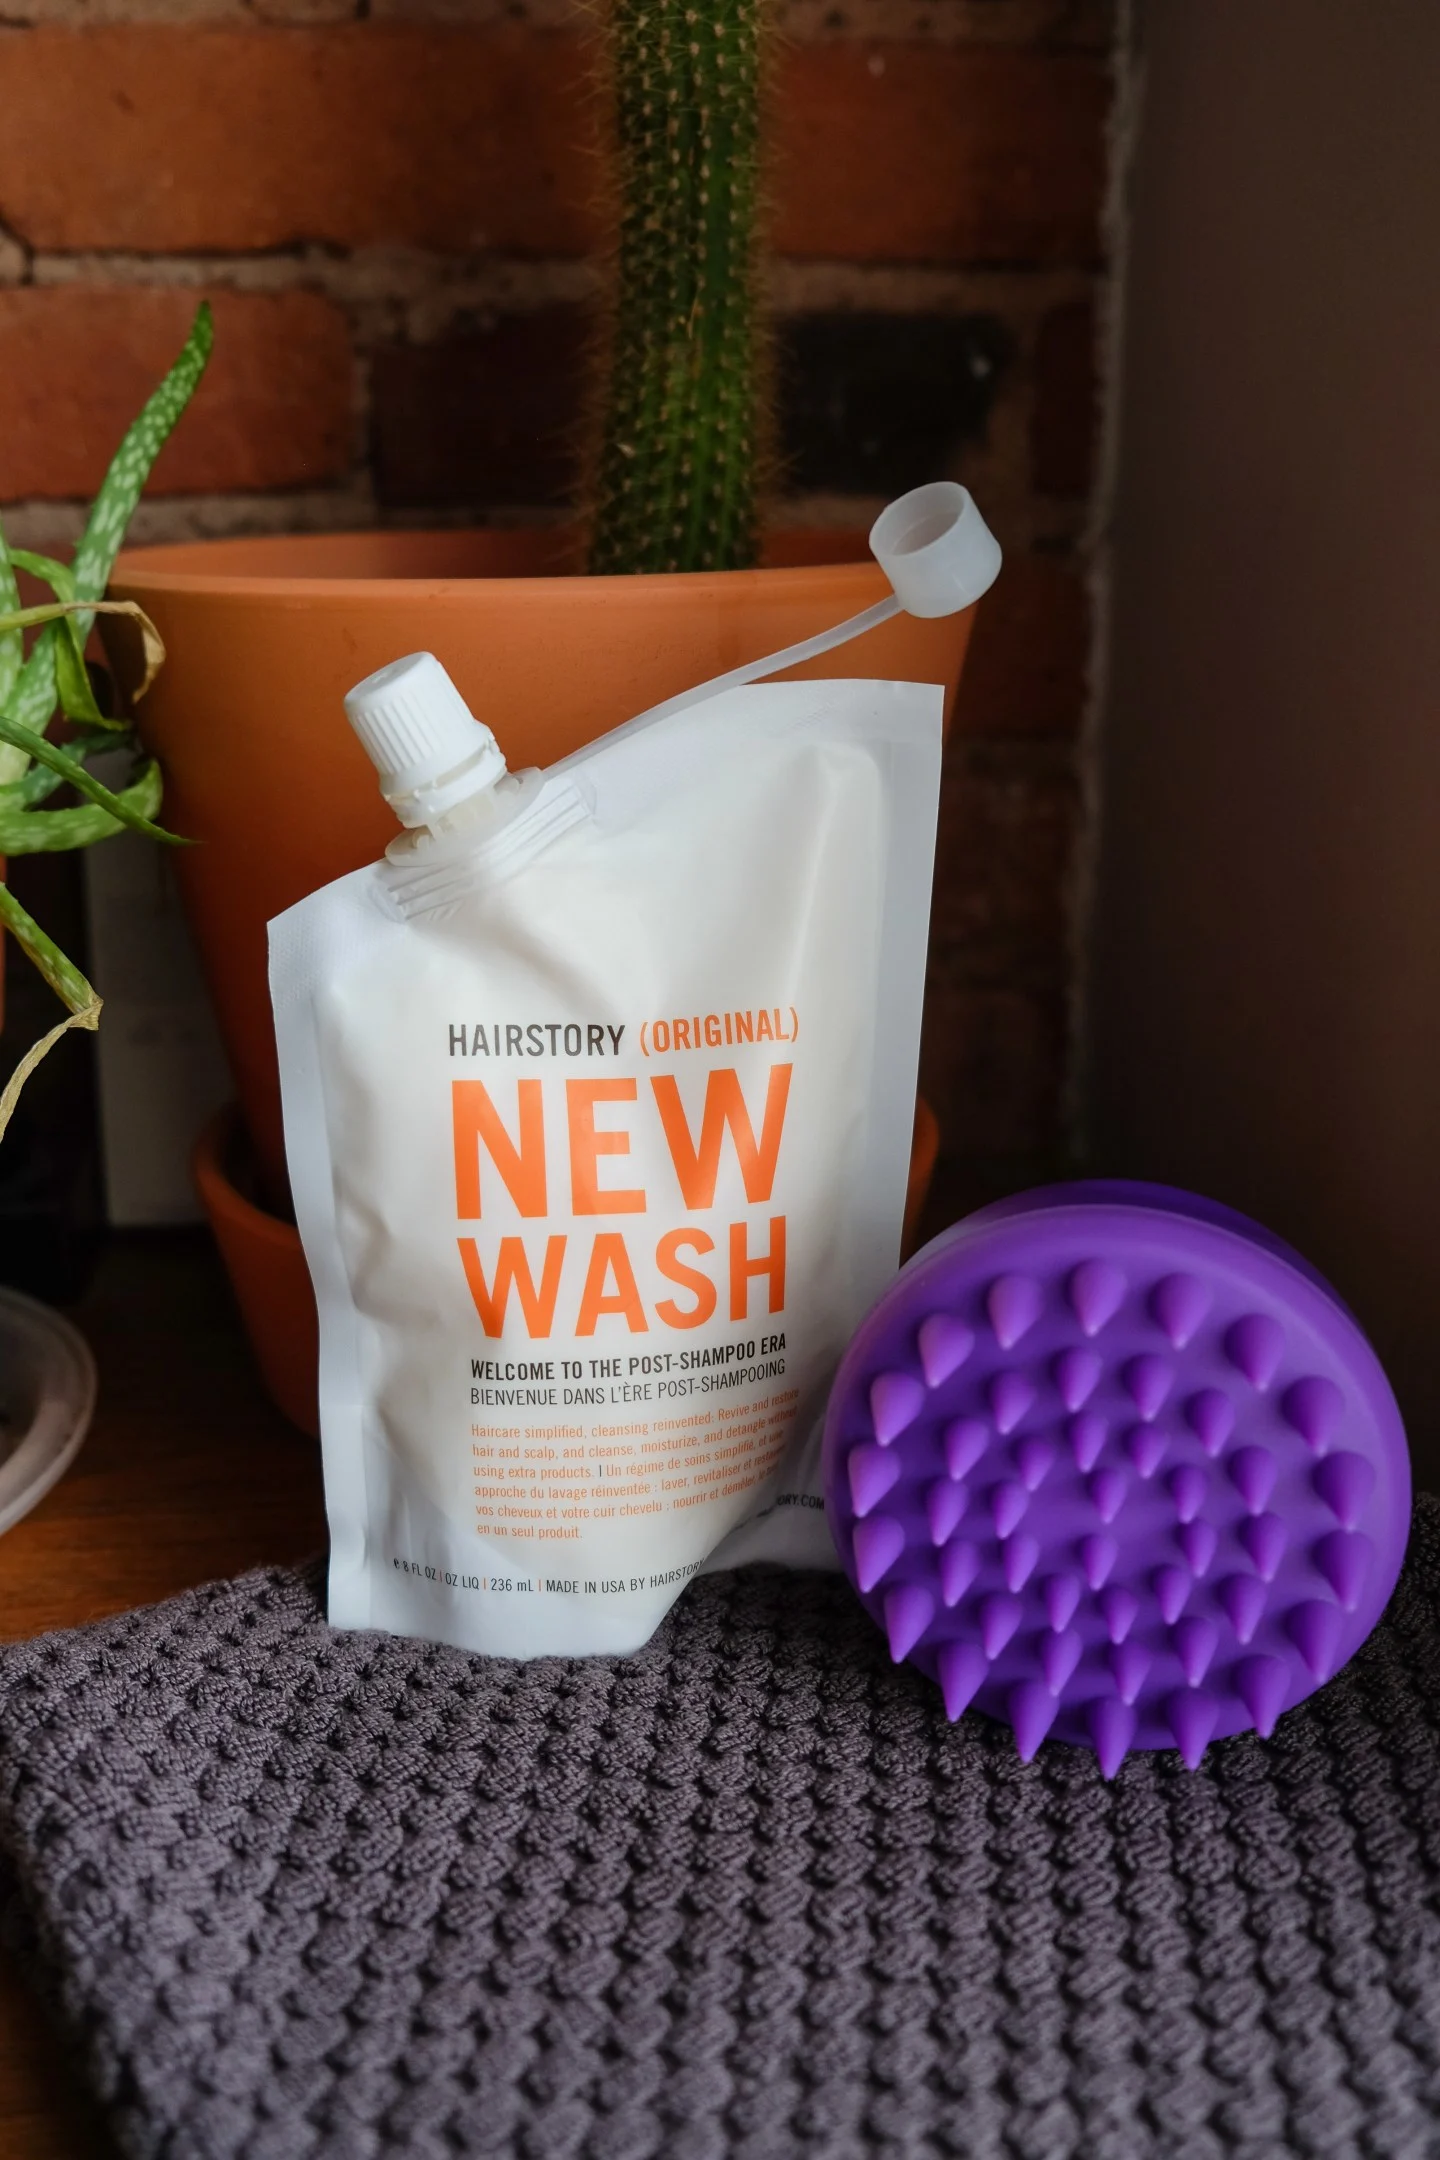 Is Hairstory Worth It? Unsponsored New Wash Review - StyleWise | Ethical and Sustainable Fashion